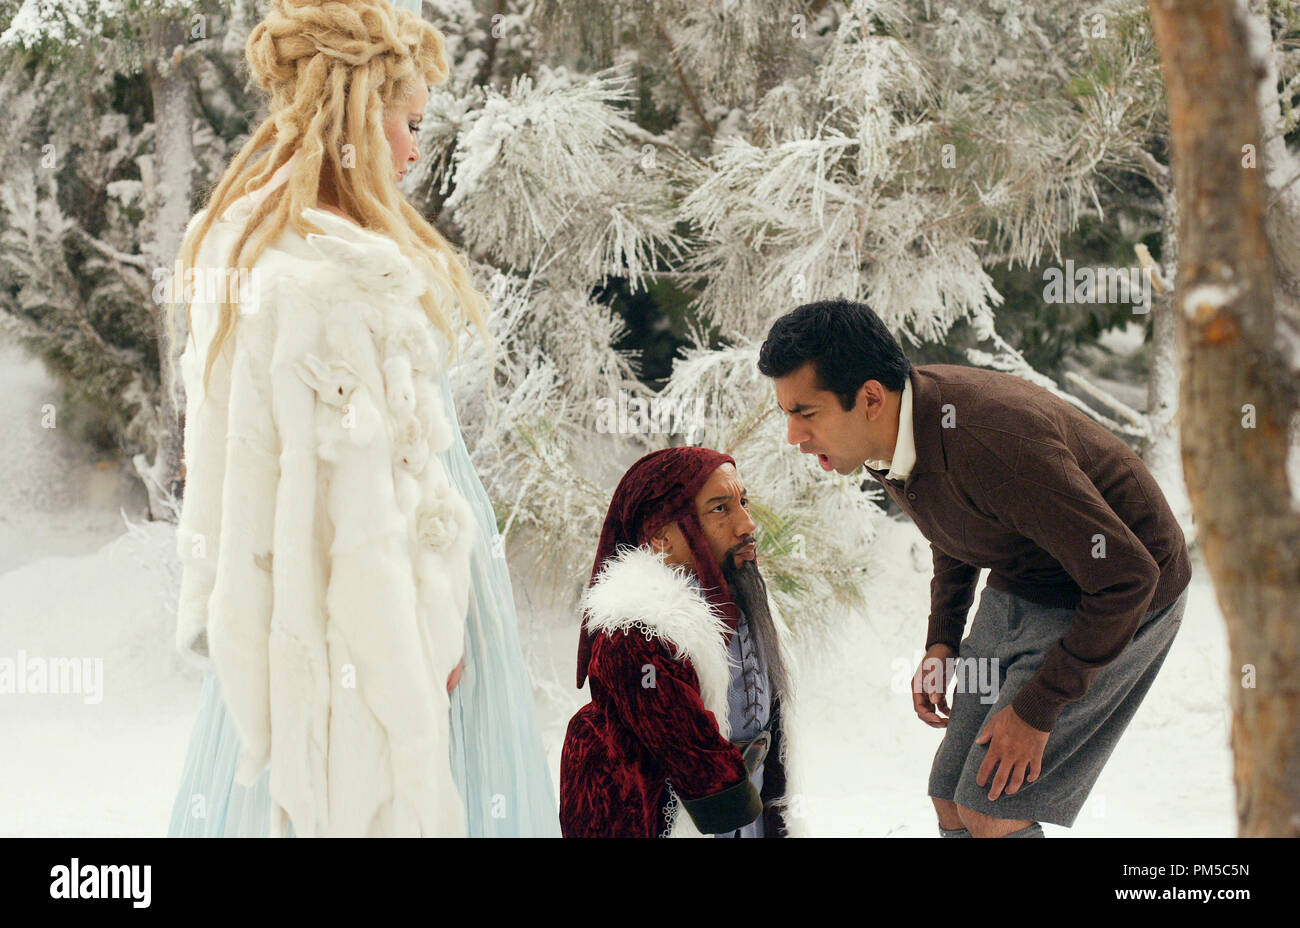 Studio Publicity Still from 'Epic Movie' Kal Penn, Tony Cox, Jennifer Coolidge © 2007 Regency Entertainment Photo credit: John P. Johnson   File Reference # 30738925THA  For Editorial Use Only -  All Rights Reserved Stock Photo